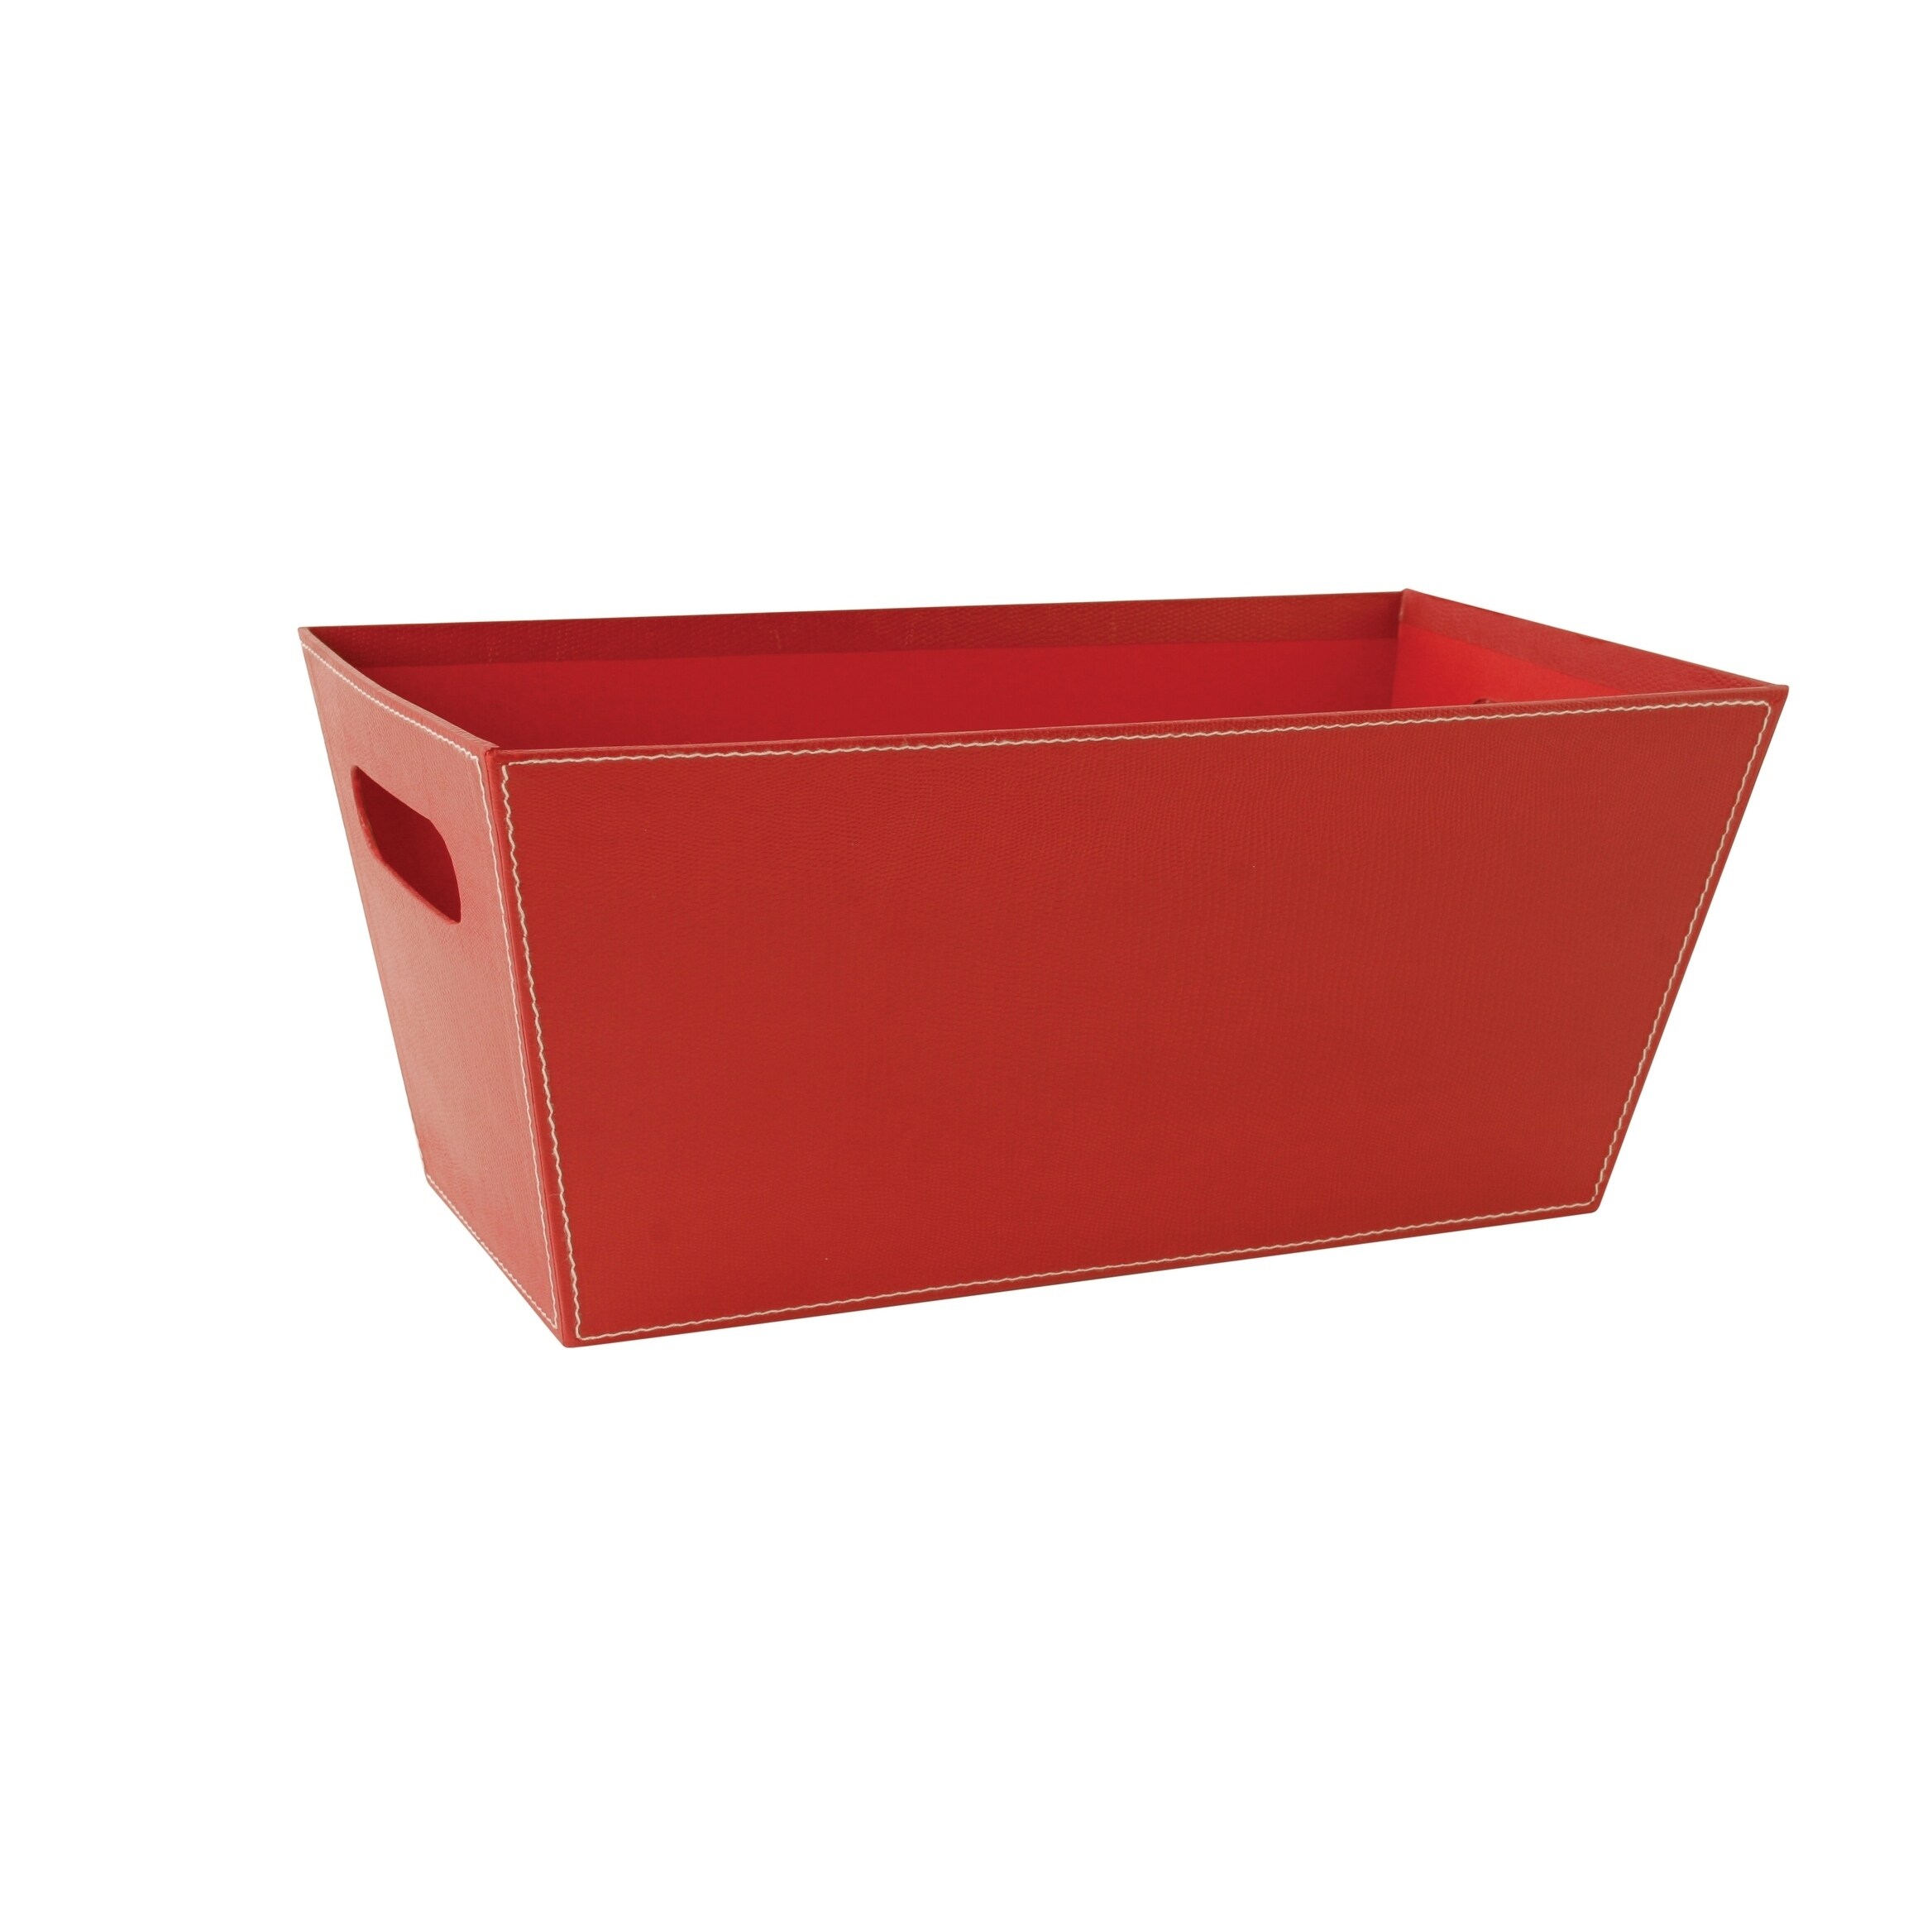 13" Red Paperboard Tote - image 2 of 2